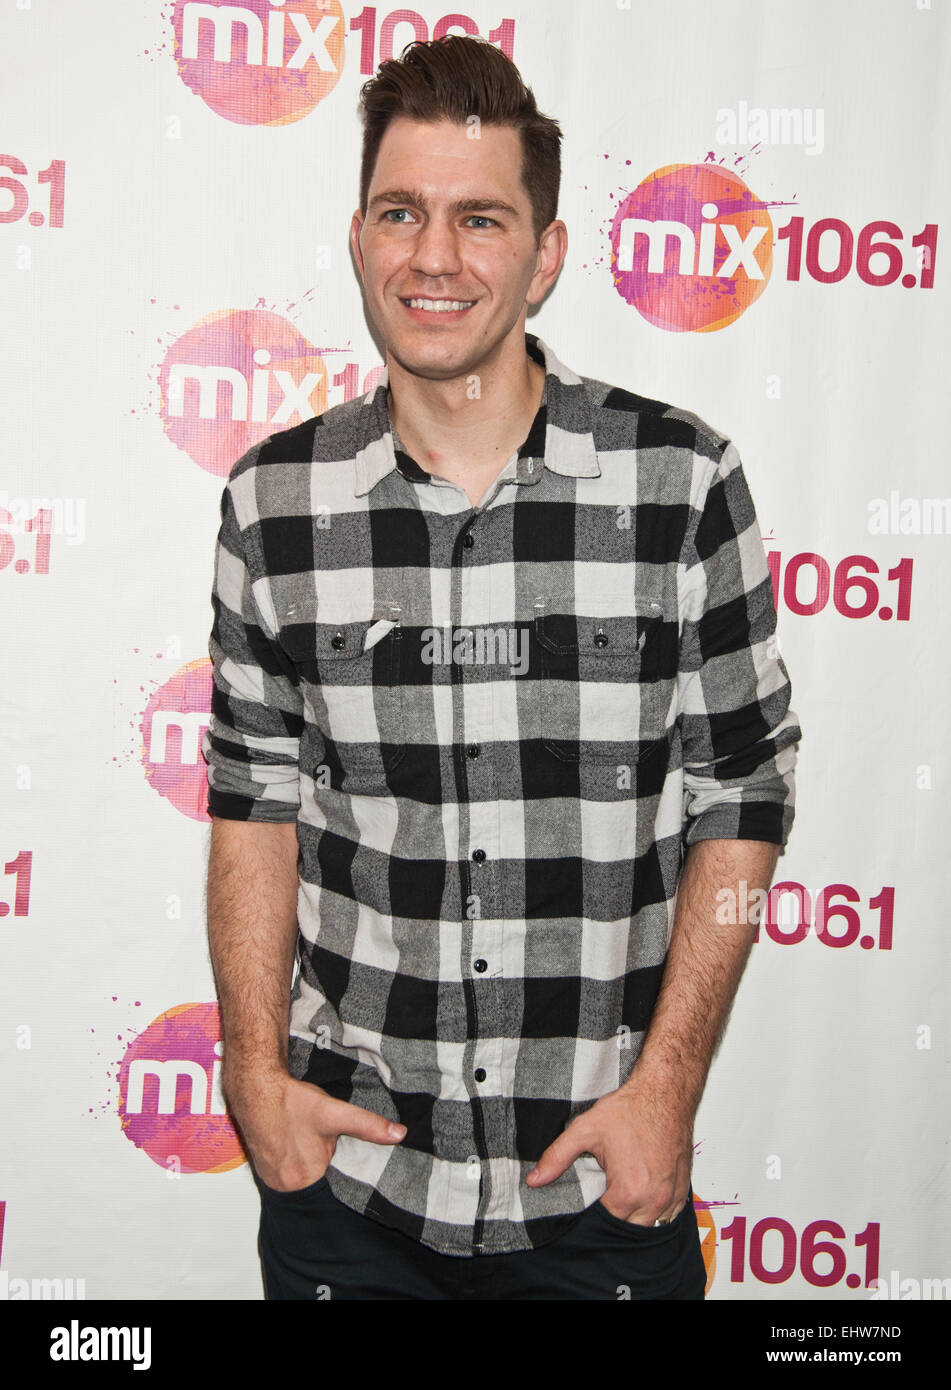 Bala Cynwyd, Pennsylvania, USA. 17th March, 2015. American Singer-Songwriter Andy Grammer Poses at Mix 106's Performance Theatre on March 17, 2015 in Bala Cynwyd, Pennsylvania, United States. Credit:  Paul Froggatt/Alamy Live News Stock Photo